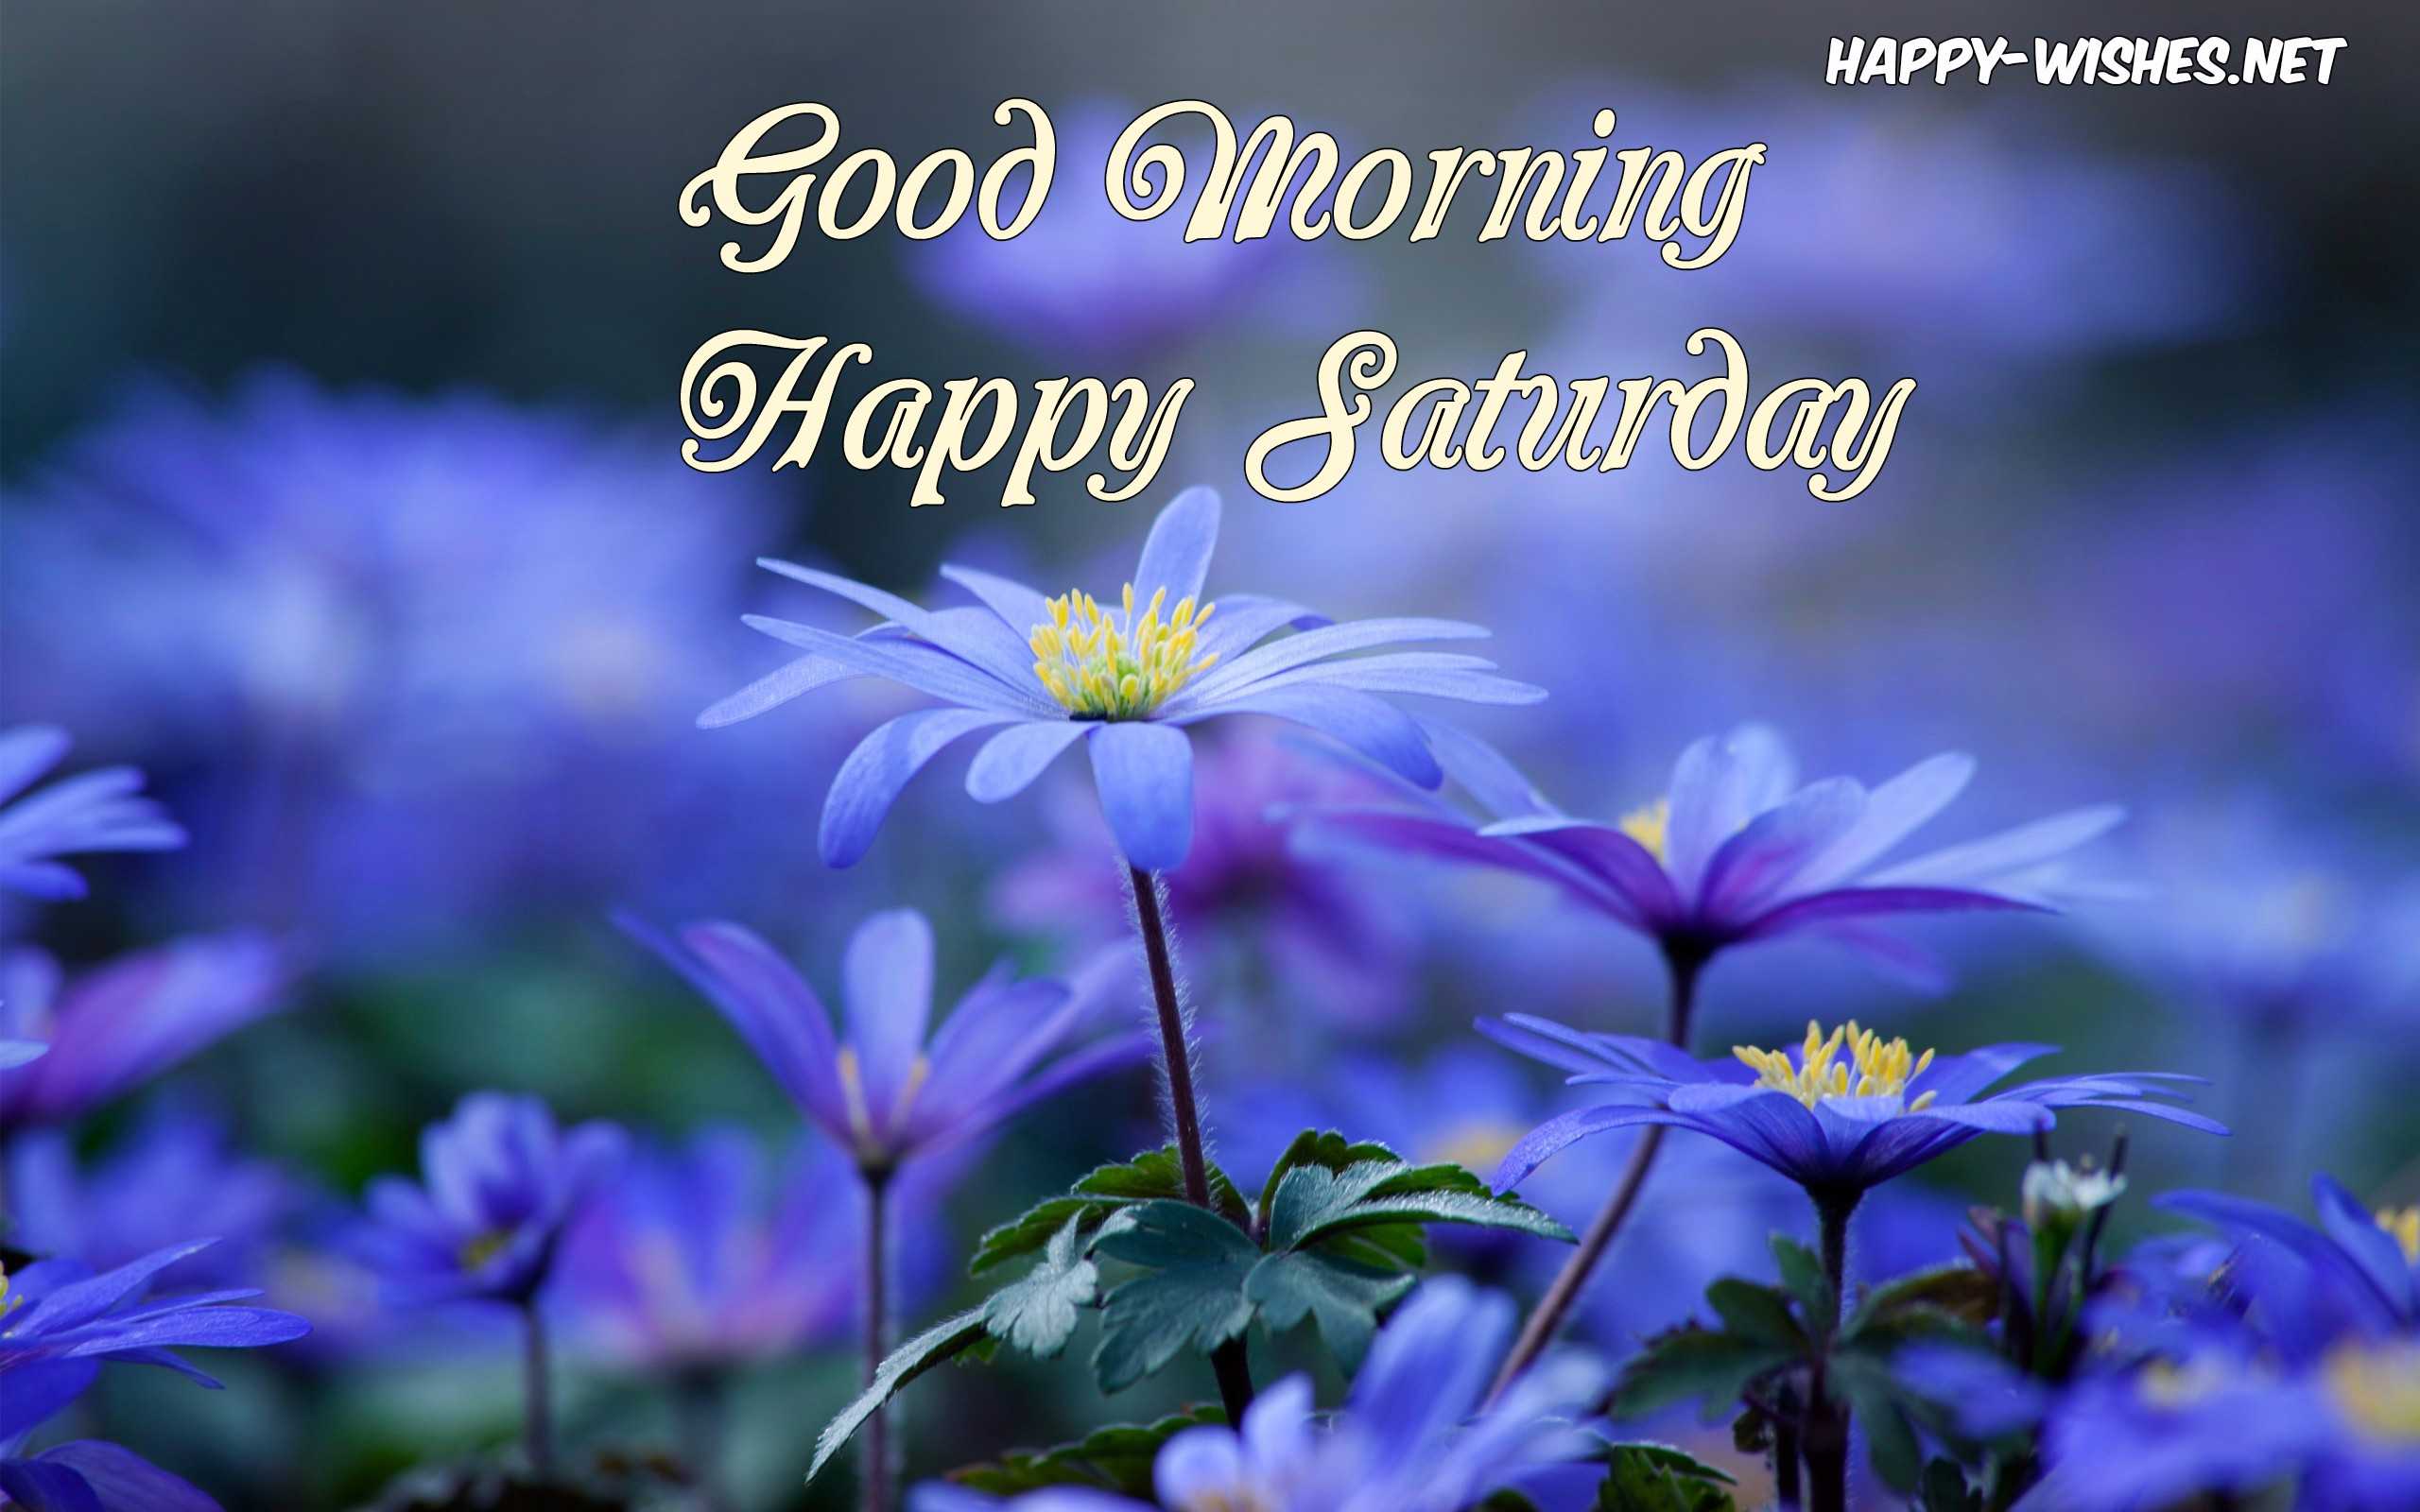 Good Morning wishes on Saturday - images